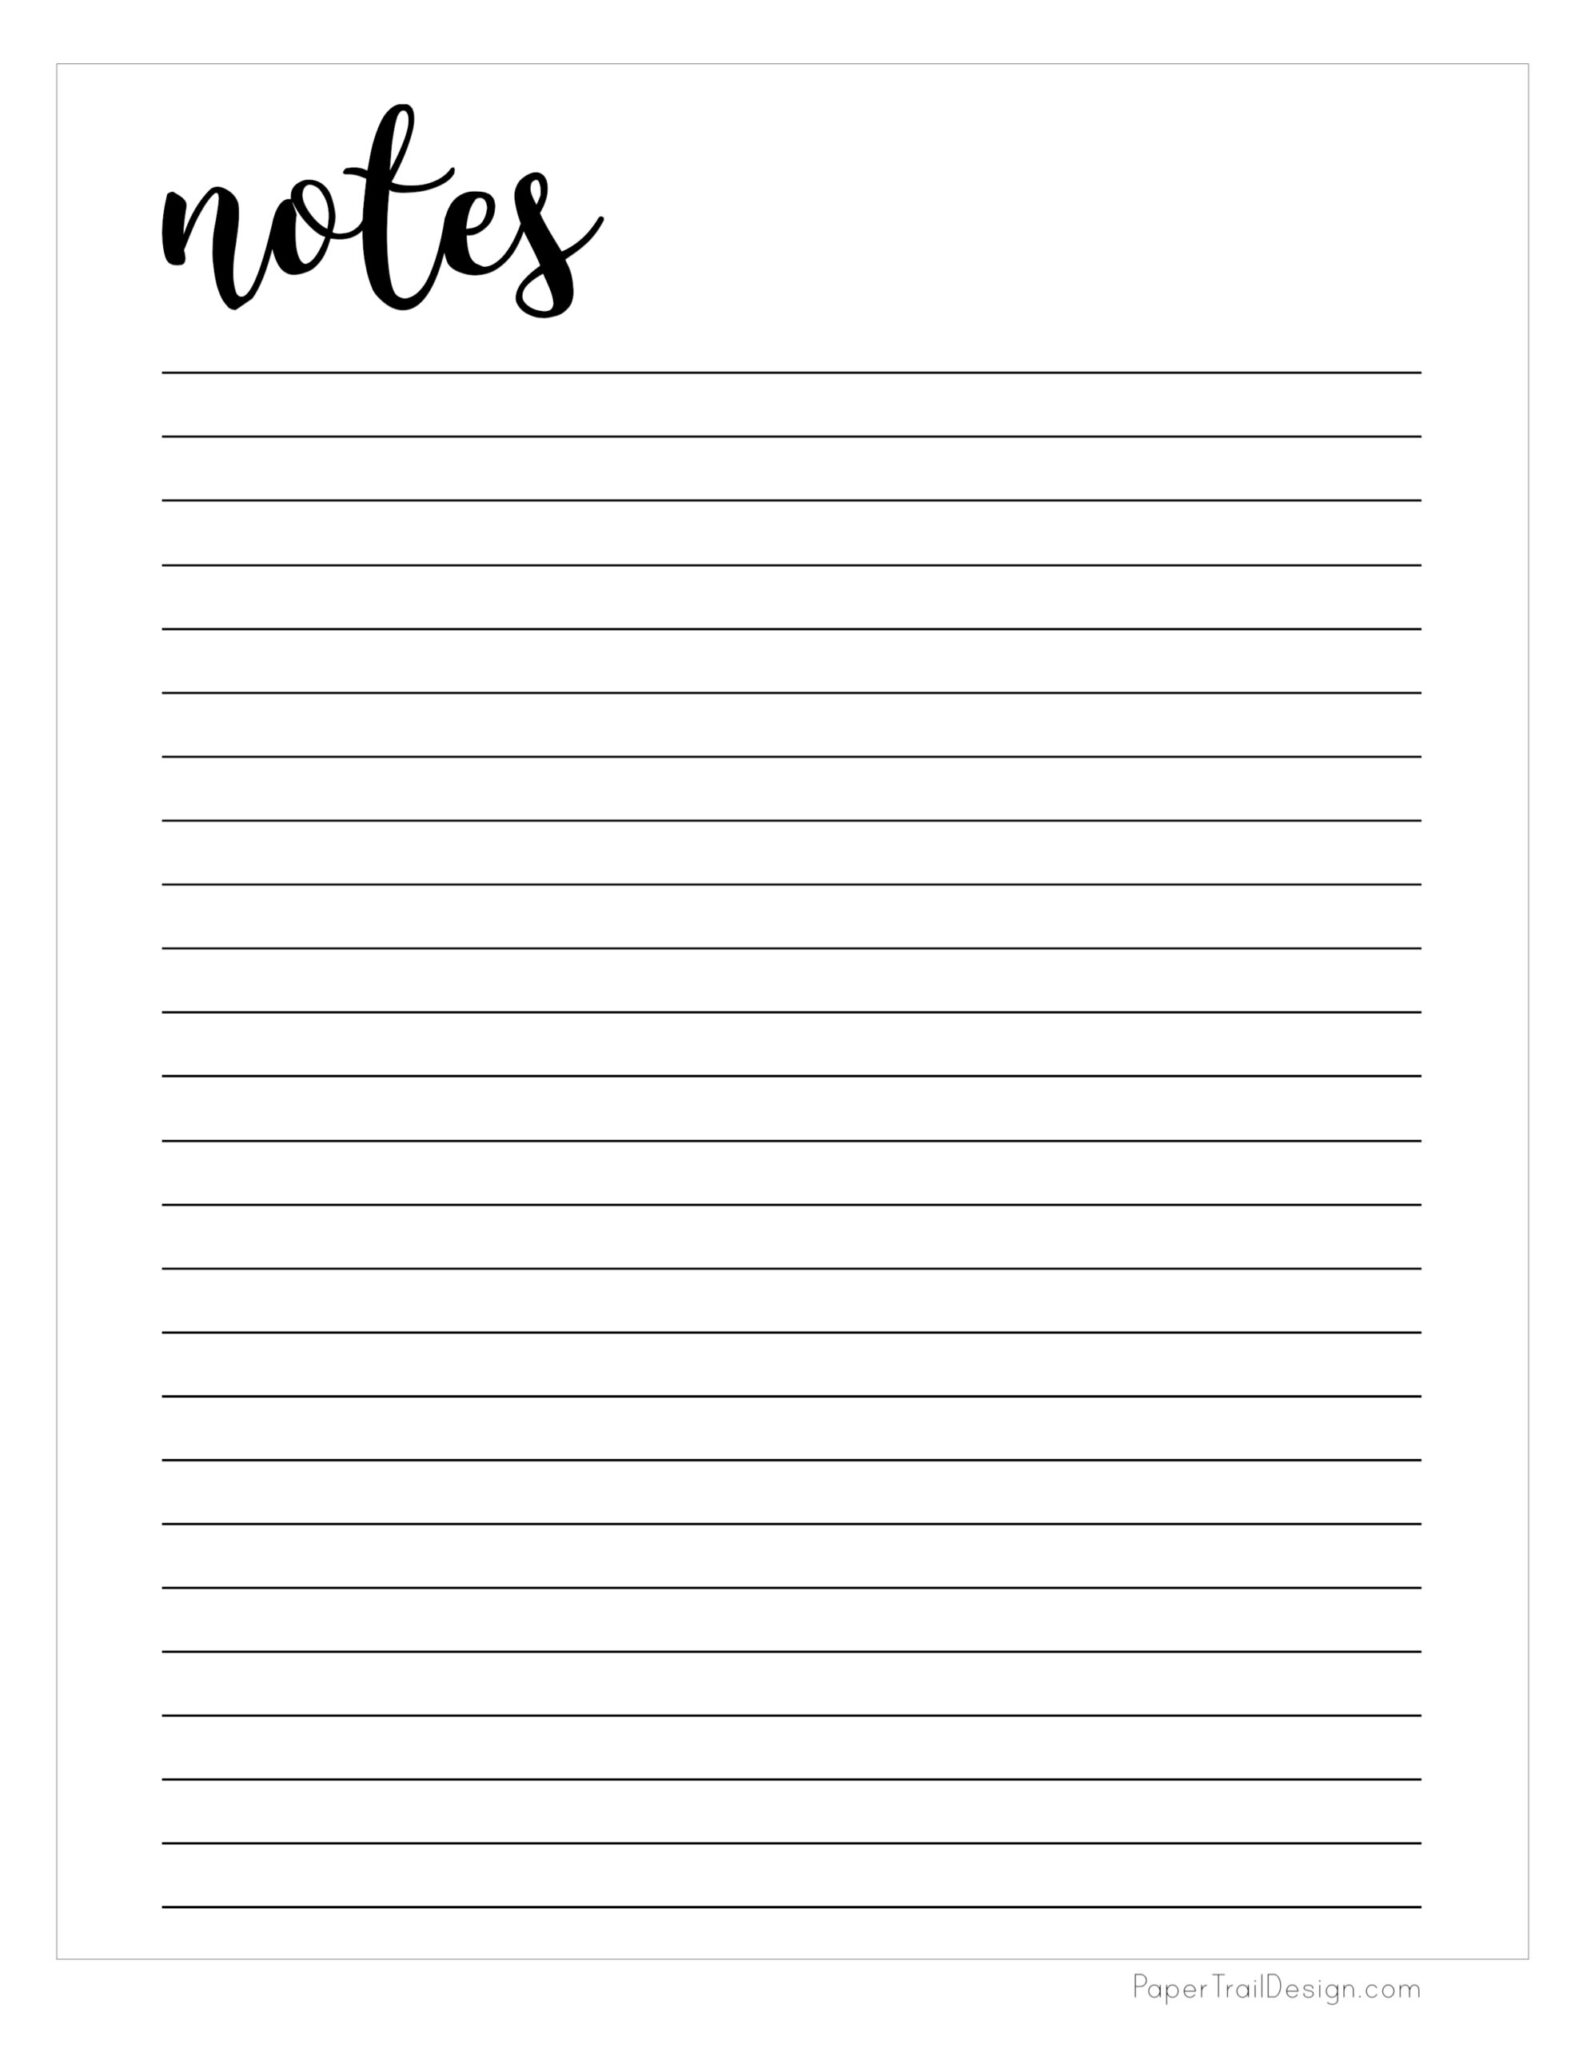 printable-notes-template